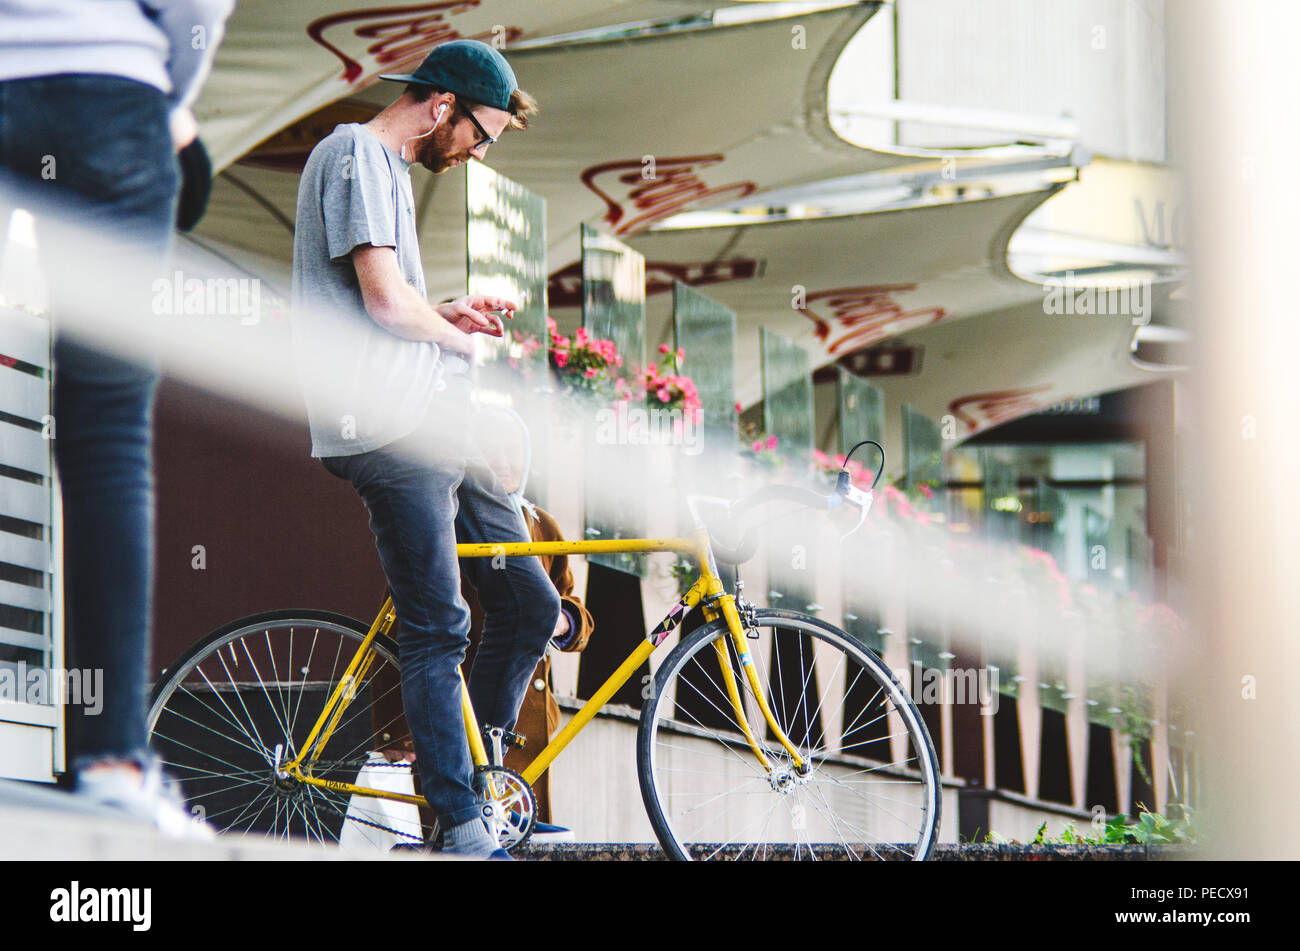 September 22, 2018 Minsk, Belarus: Young man stand with yellow fixie bike in cityscape and makes hand-roll cigarette Stock Photo